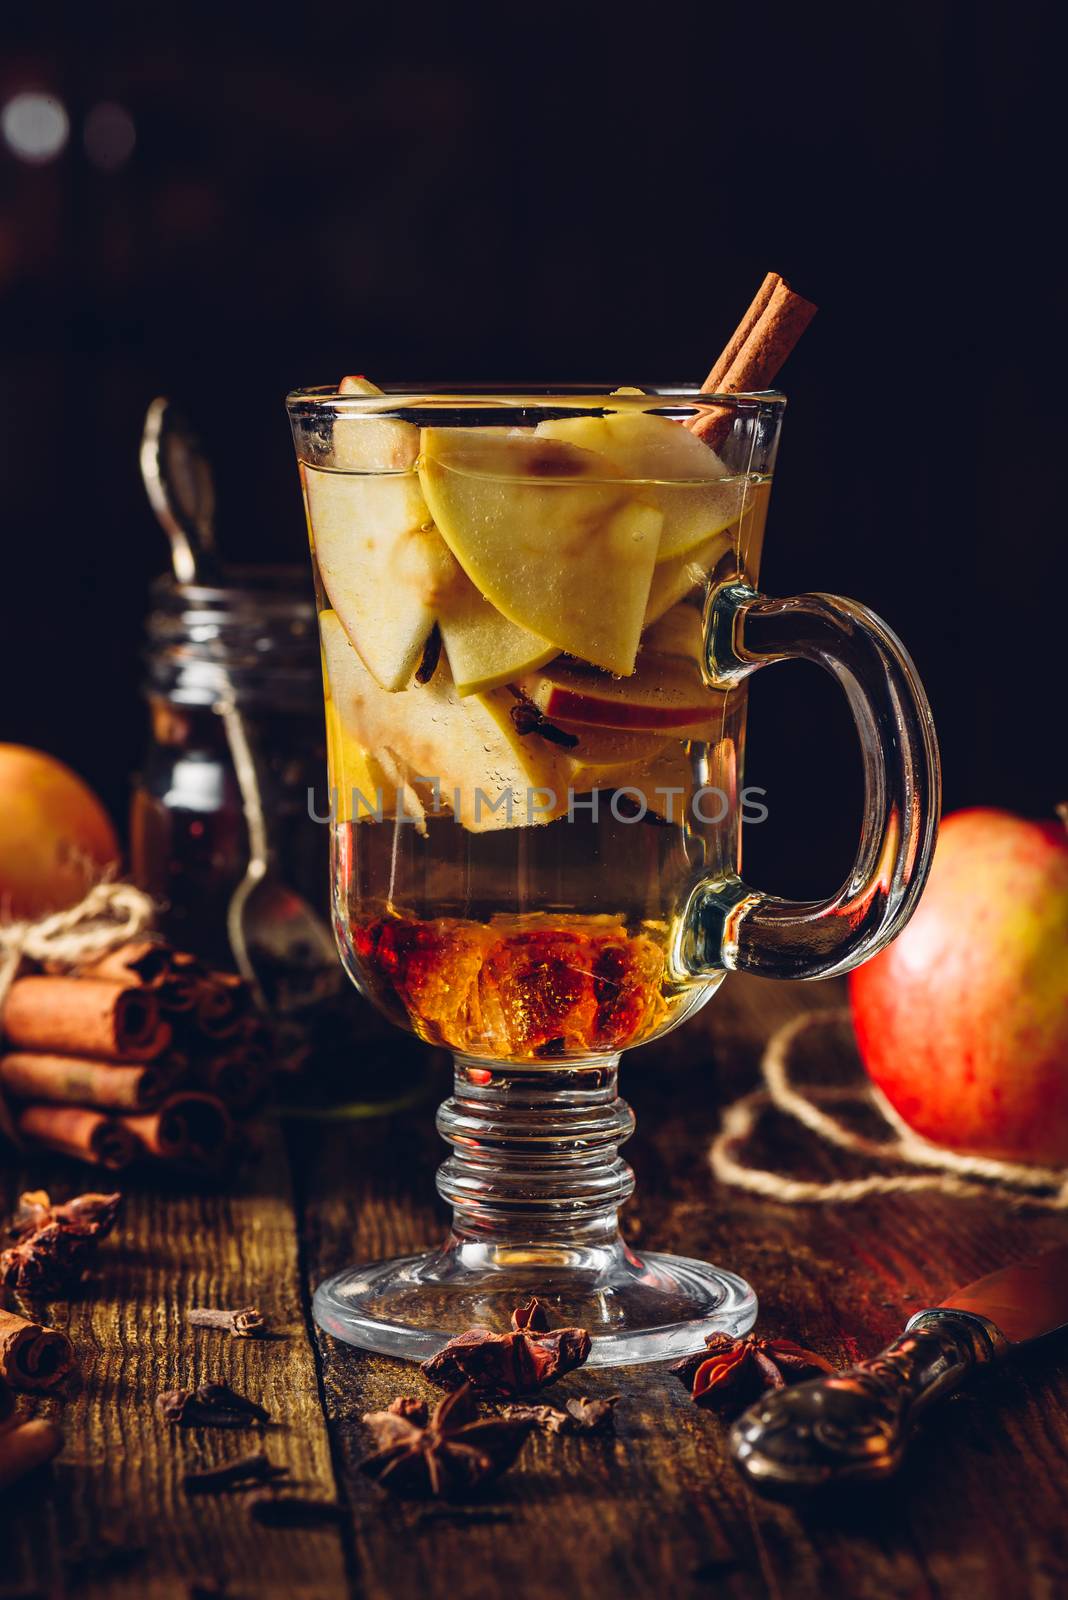 Glass of Apple Mulled Drink with Clove, Cinnamon, Anise Star and Dark Candy Sugar. All Ingredients and Some Kitchen utensils on Wooden Table. Vertical.